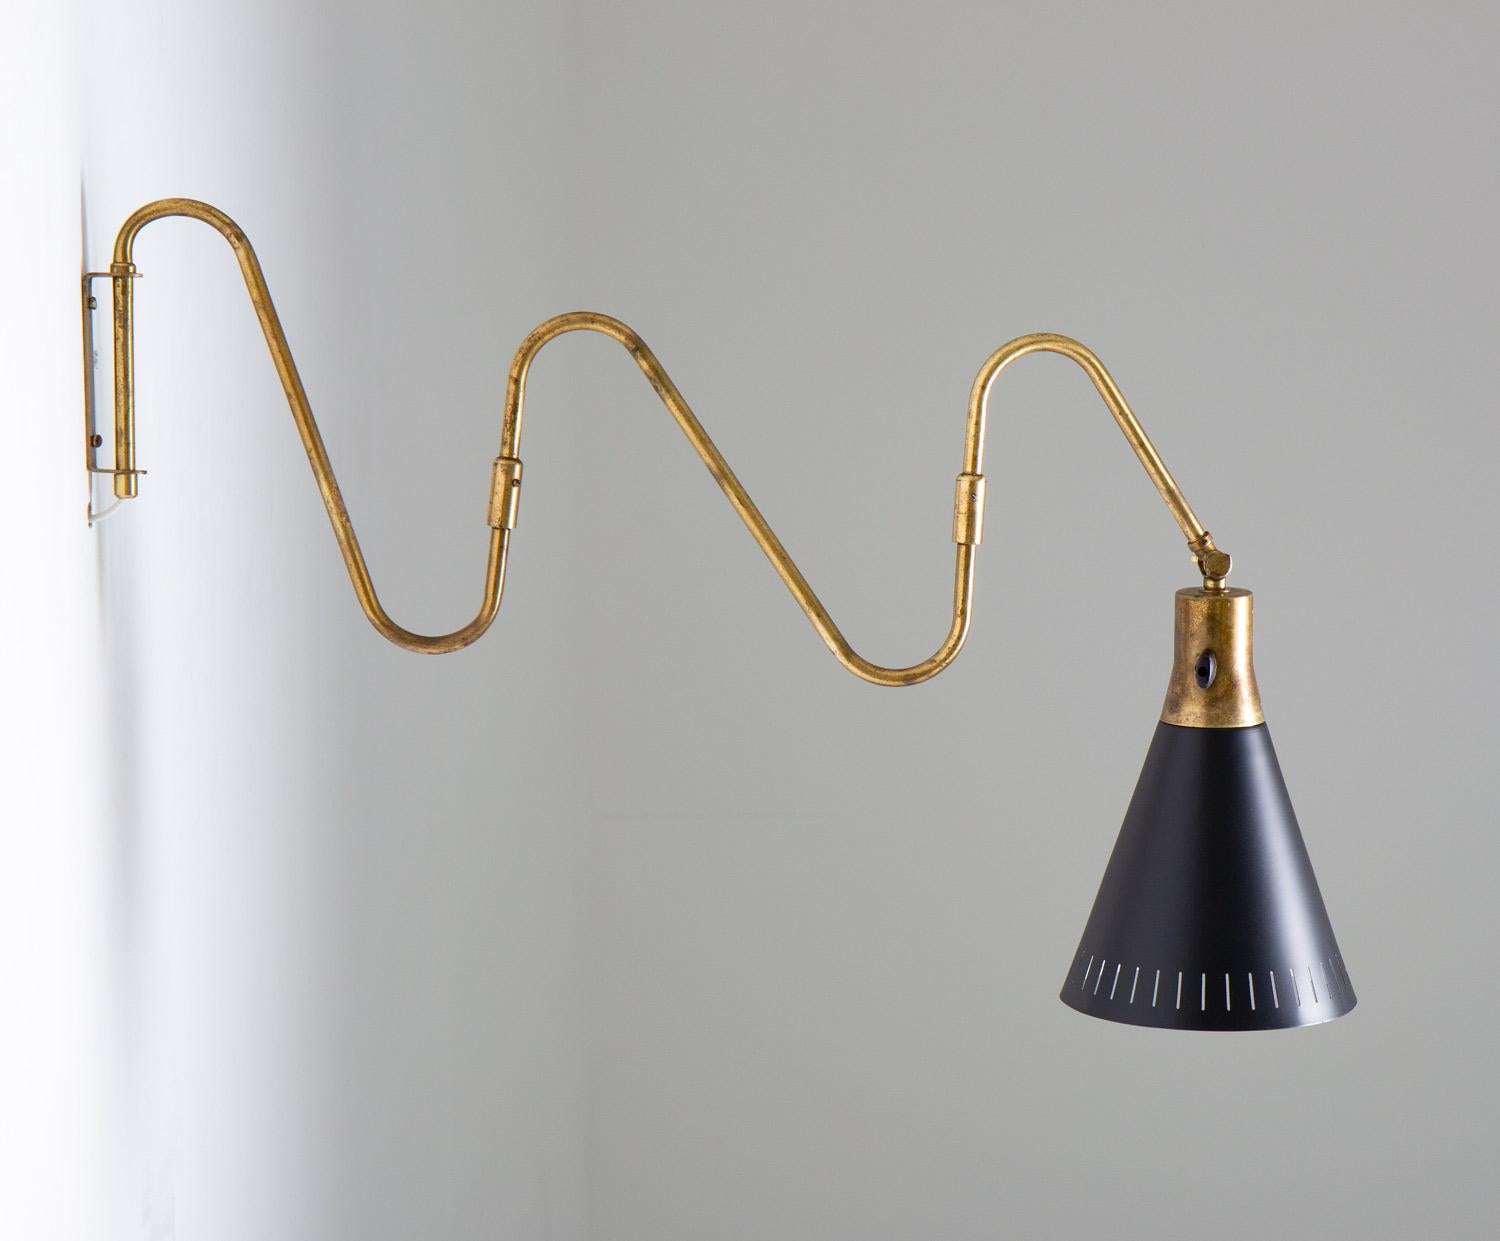 Swivel arm wall lamp in brass with perforated black laquered metal shade. It features a three-piece swing arm and adjustable head.
Condition: Very good condition with beautiful patina on the brass. The shade has been repainted.